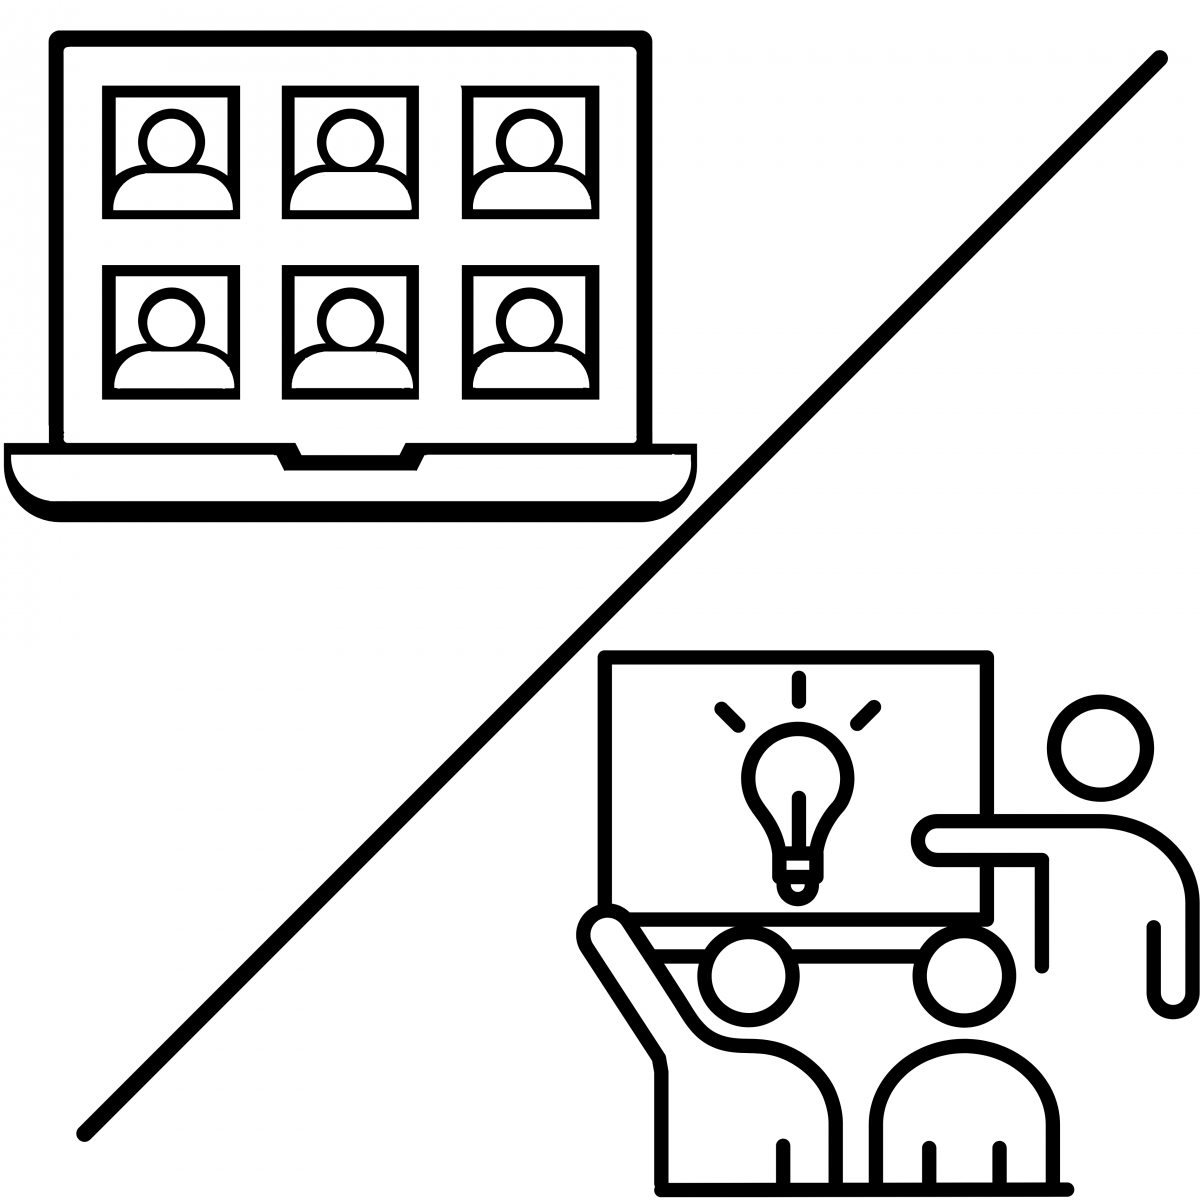 A Black Icon of Online Students learning online on one side and students learning in-person on the other side divided by diagonal line.